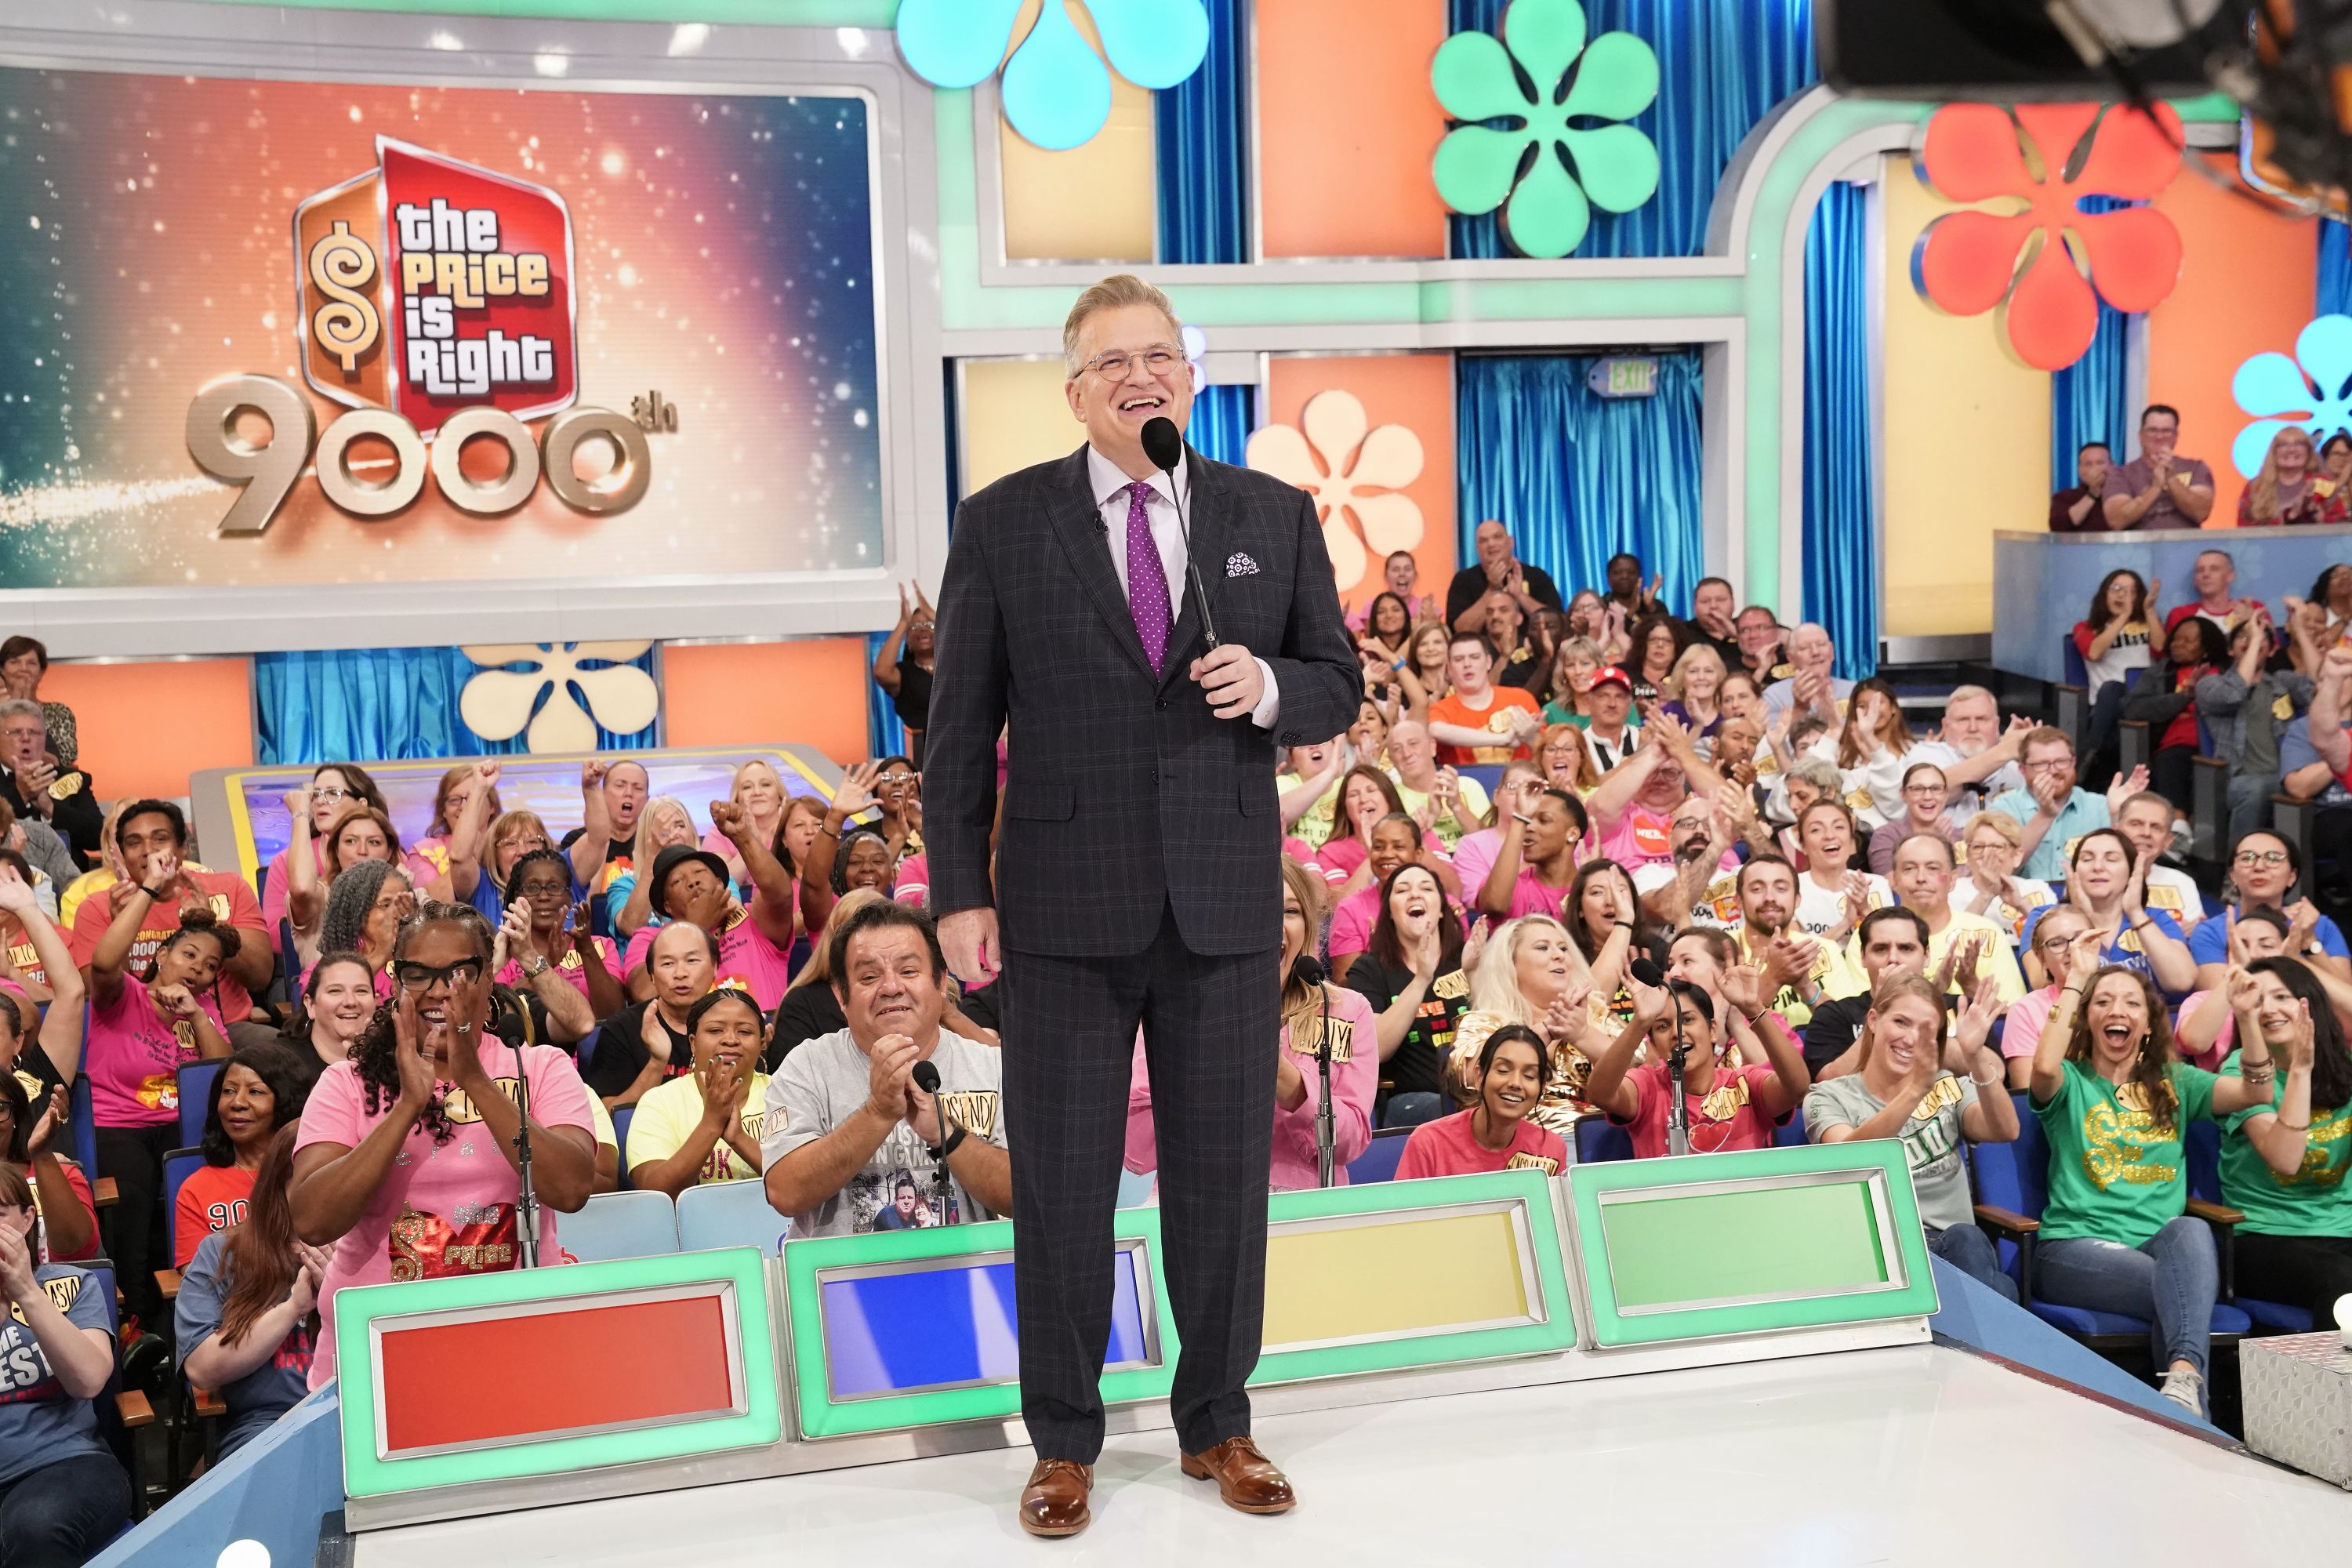 Fun fact: you get $300 if you get called down to contests row on the price is right and don’t make it to the stage.